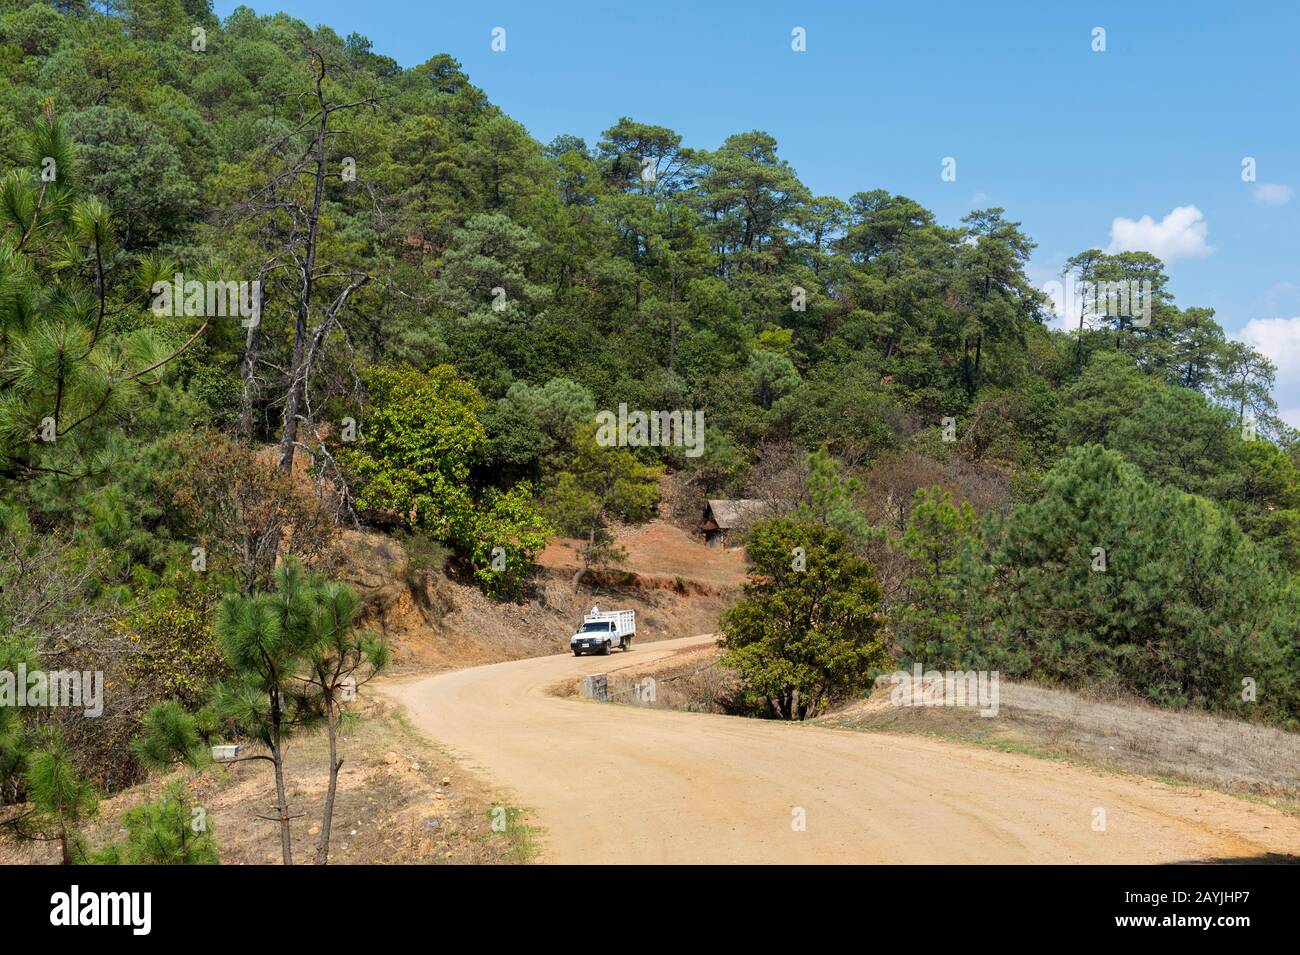 A gravel road in the hills covered with Ponderosa pine trees near the Mixtec village of San Juan Contreras near Oaxaca, Mexico. Stock Photo